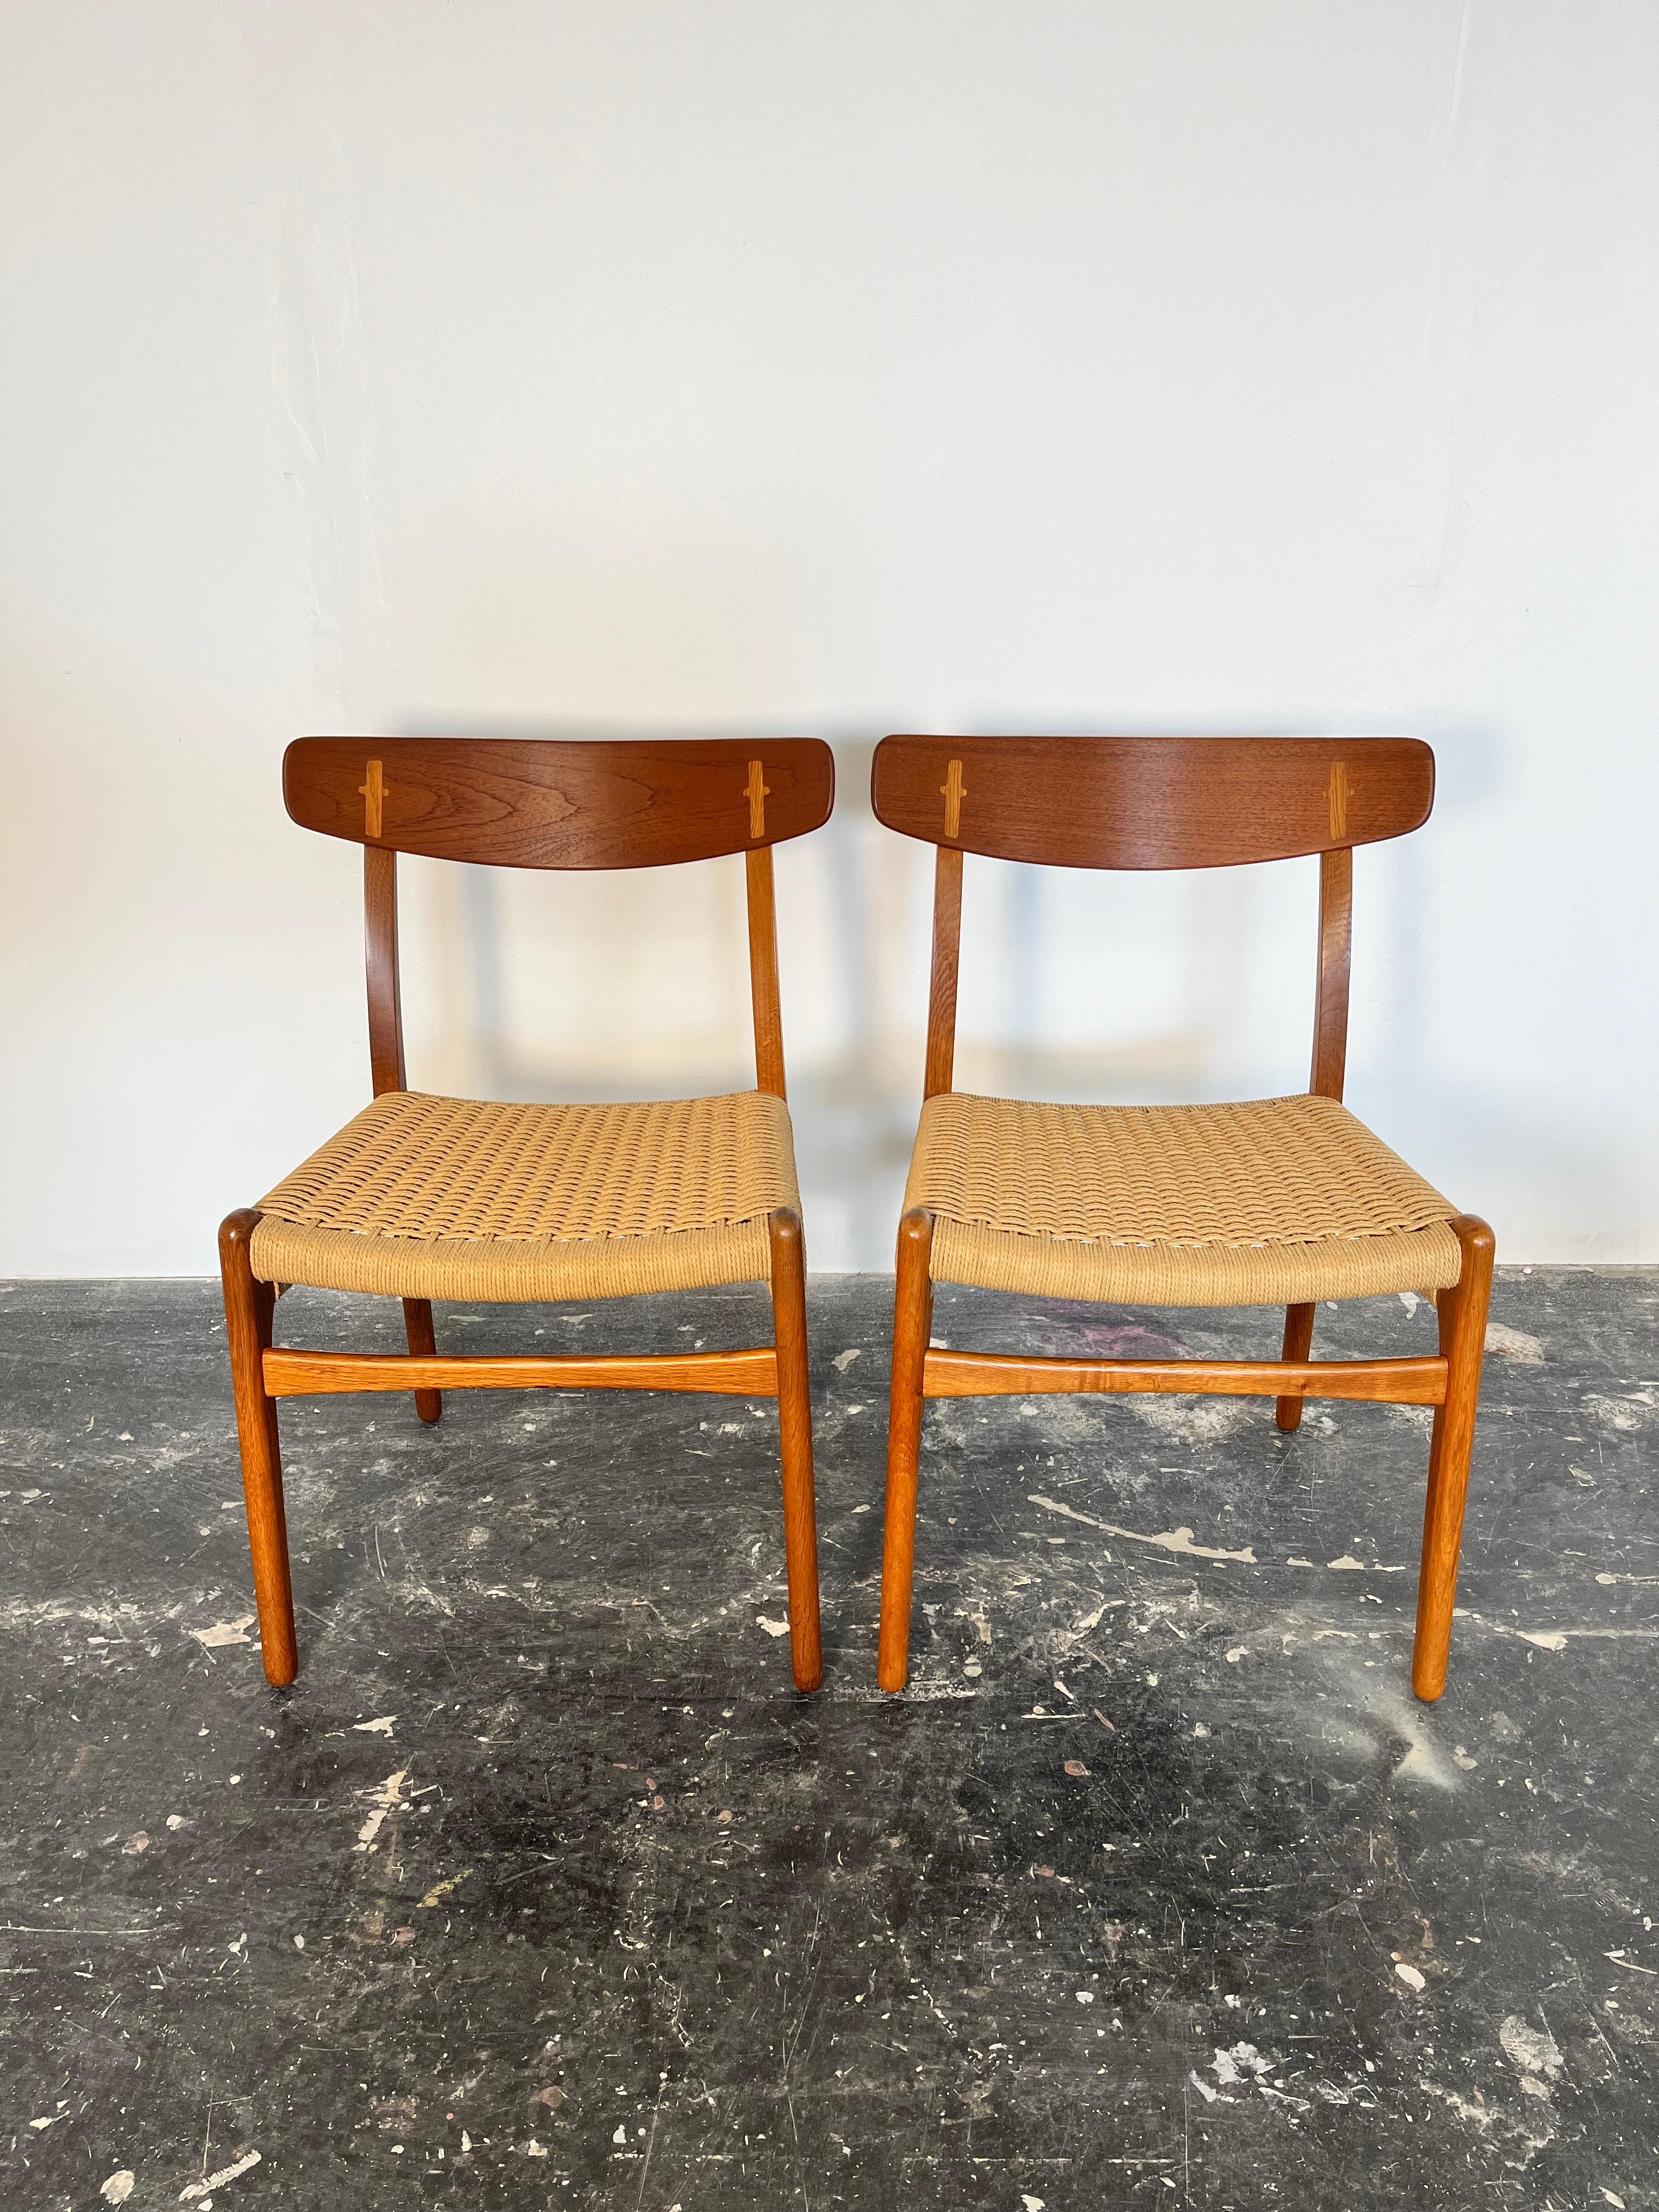 Set of Six Hans Wegner Teak CH23 Chairs in Danish Cord by Carl Hansen In Excellent Condition For Sale In San Diego, CA